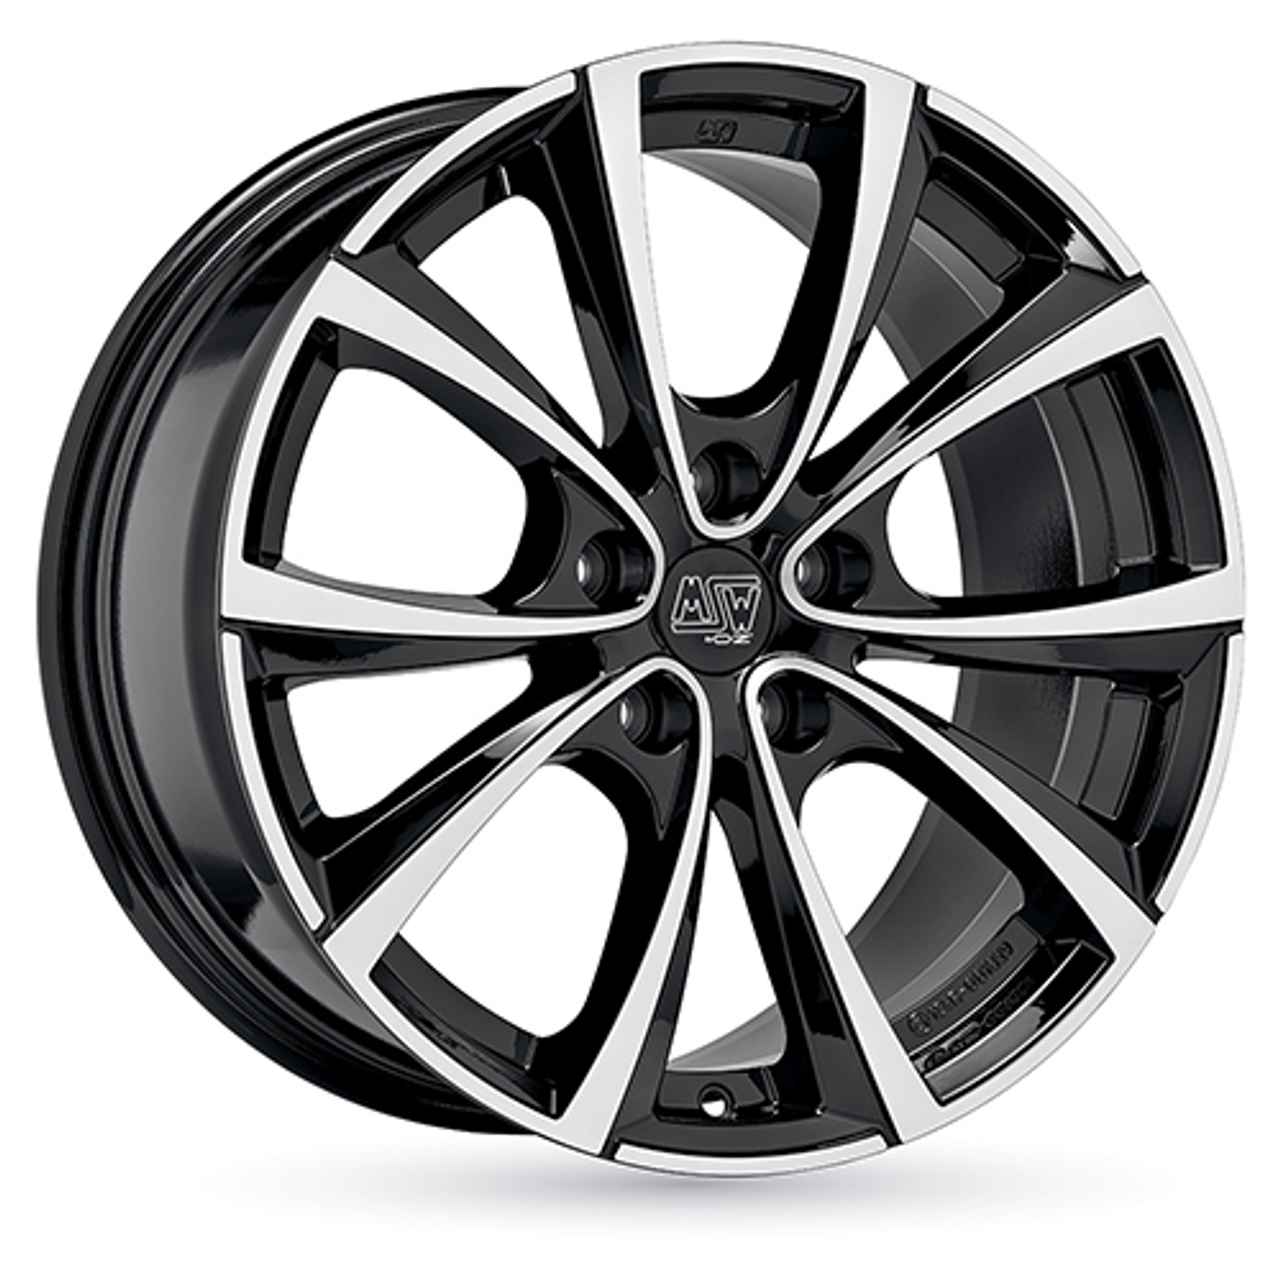 MSW (OZ) MSW 27T gloss black full polished 8.5Jx19 5x114.3 ET35